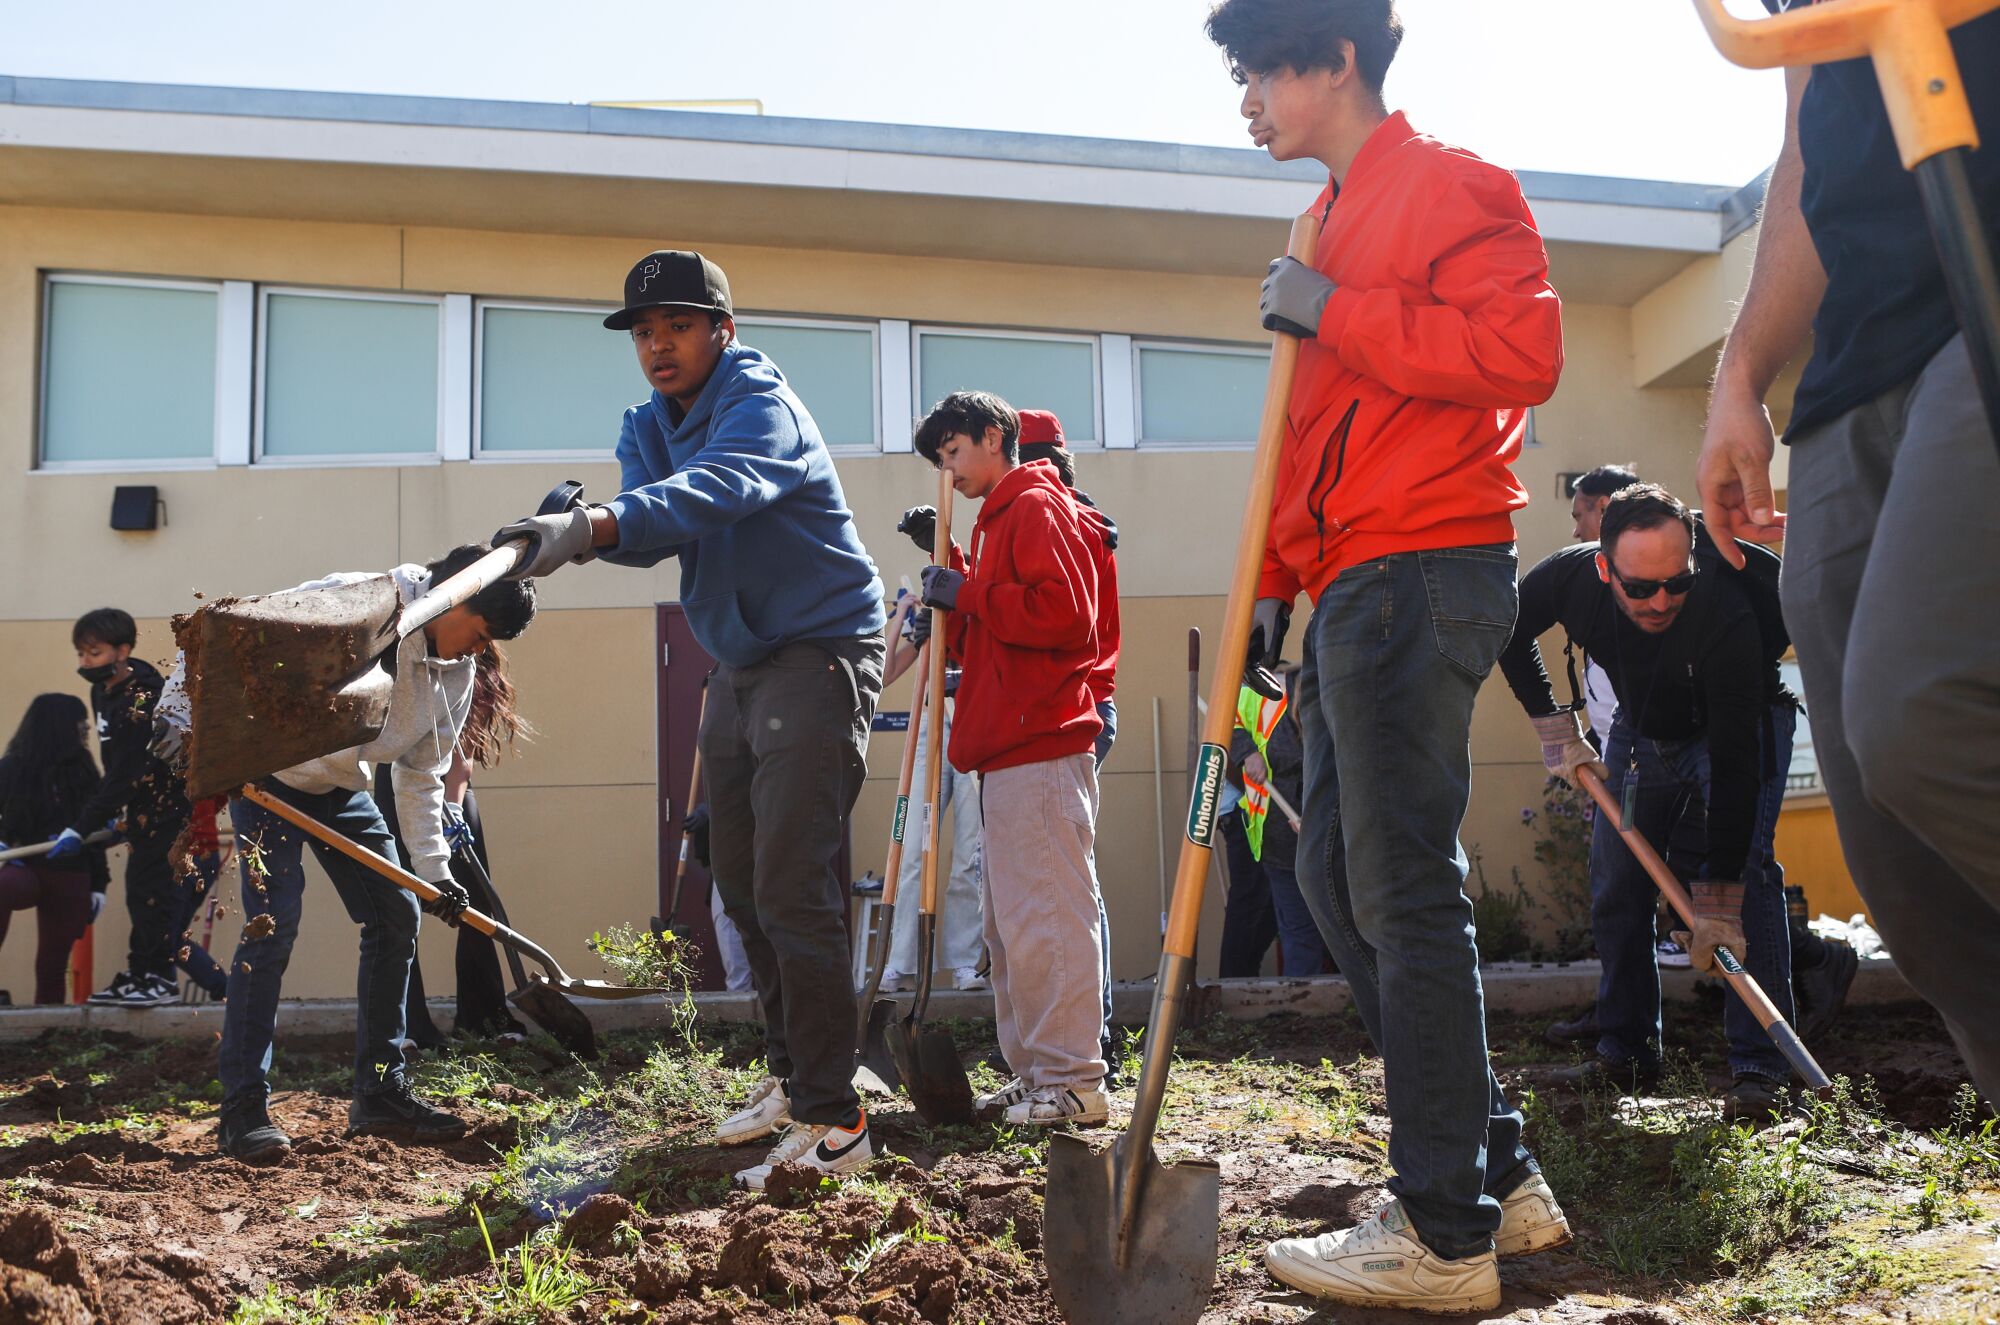 Southwest Middle School student Oliver Bennett, 14, left, and classmates work to create a community garden